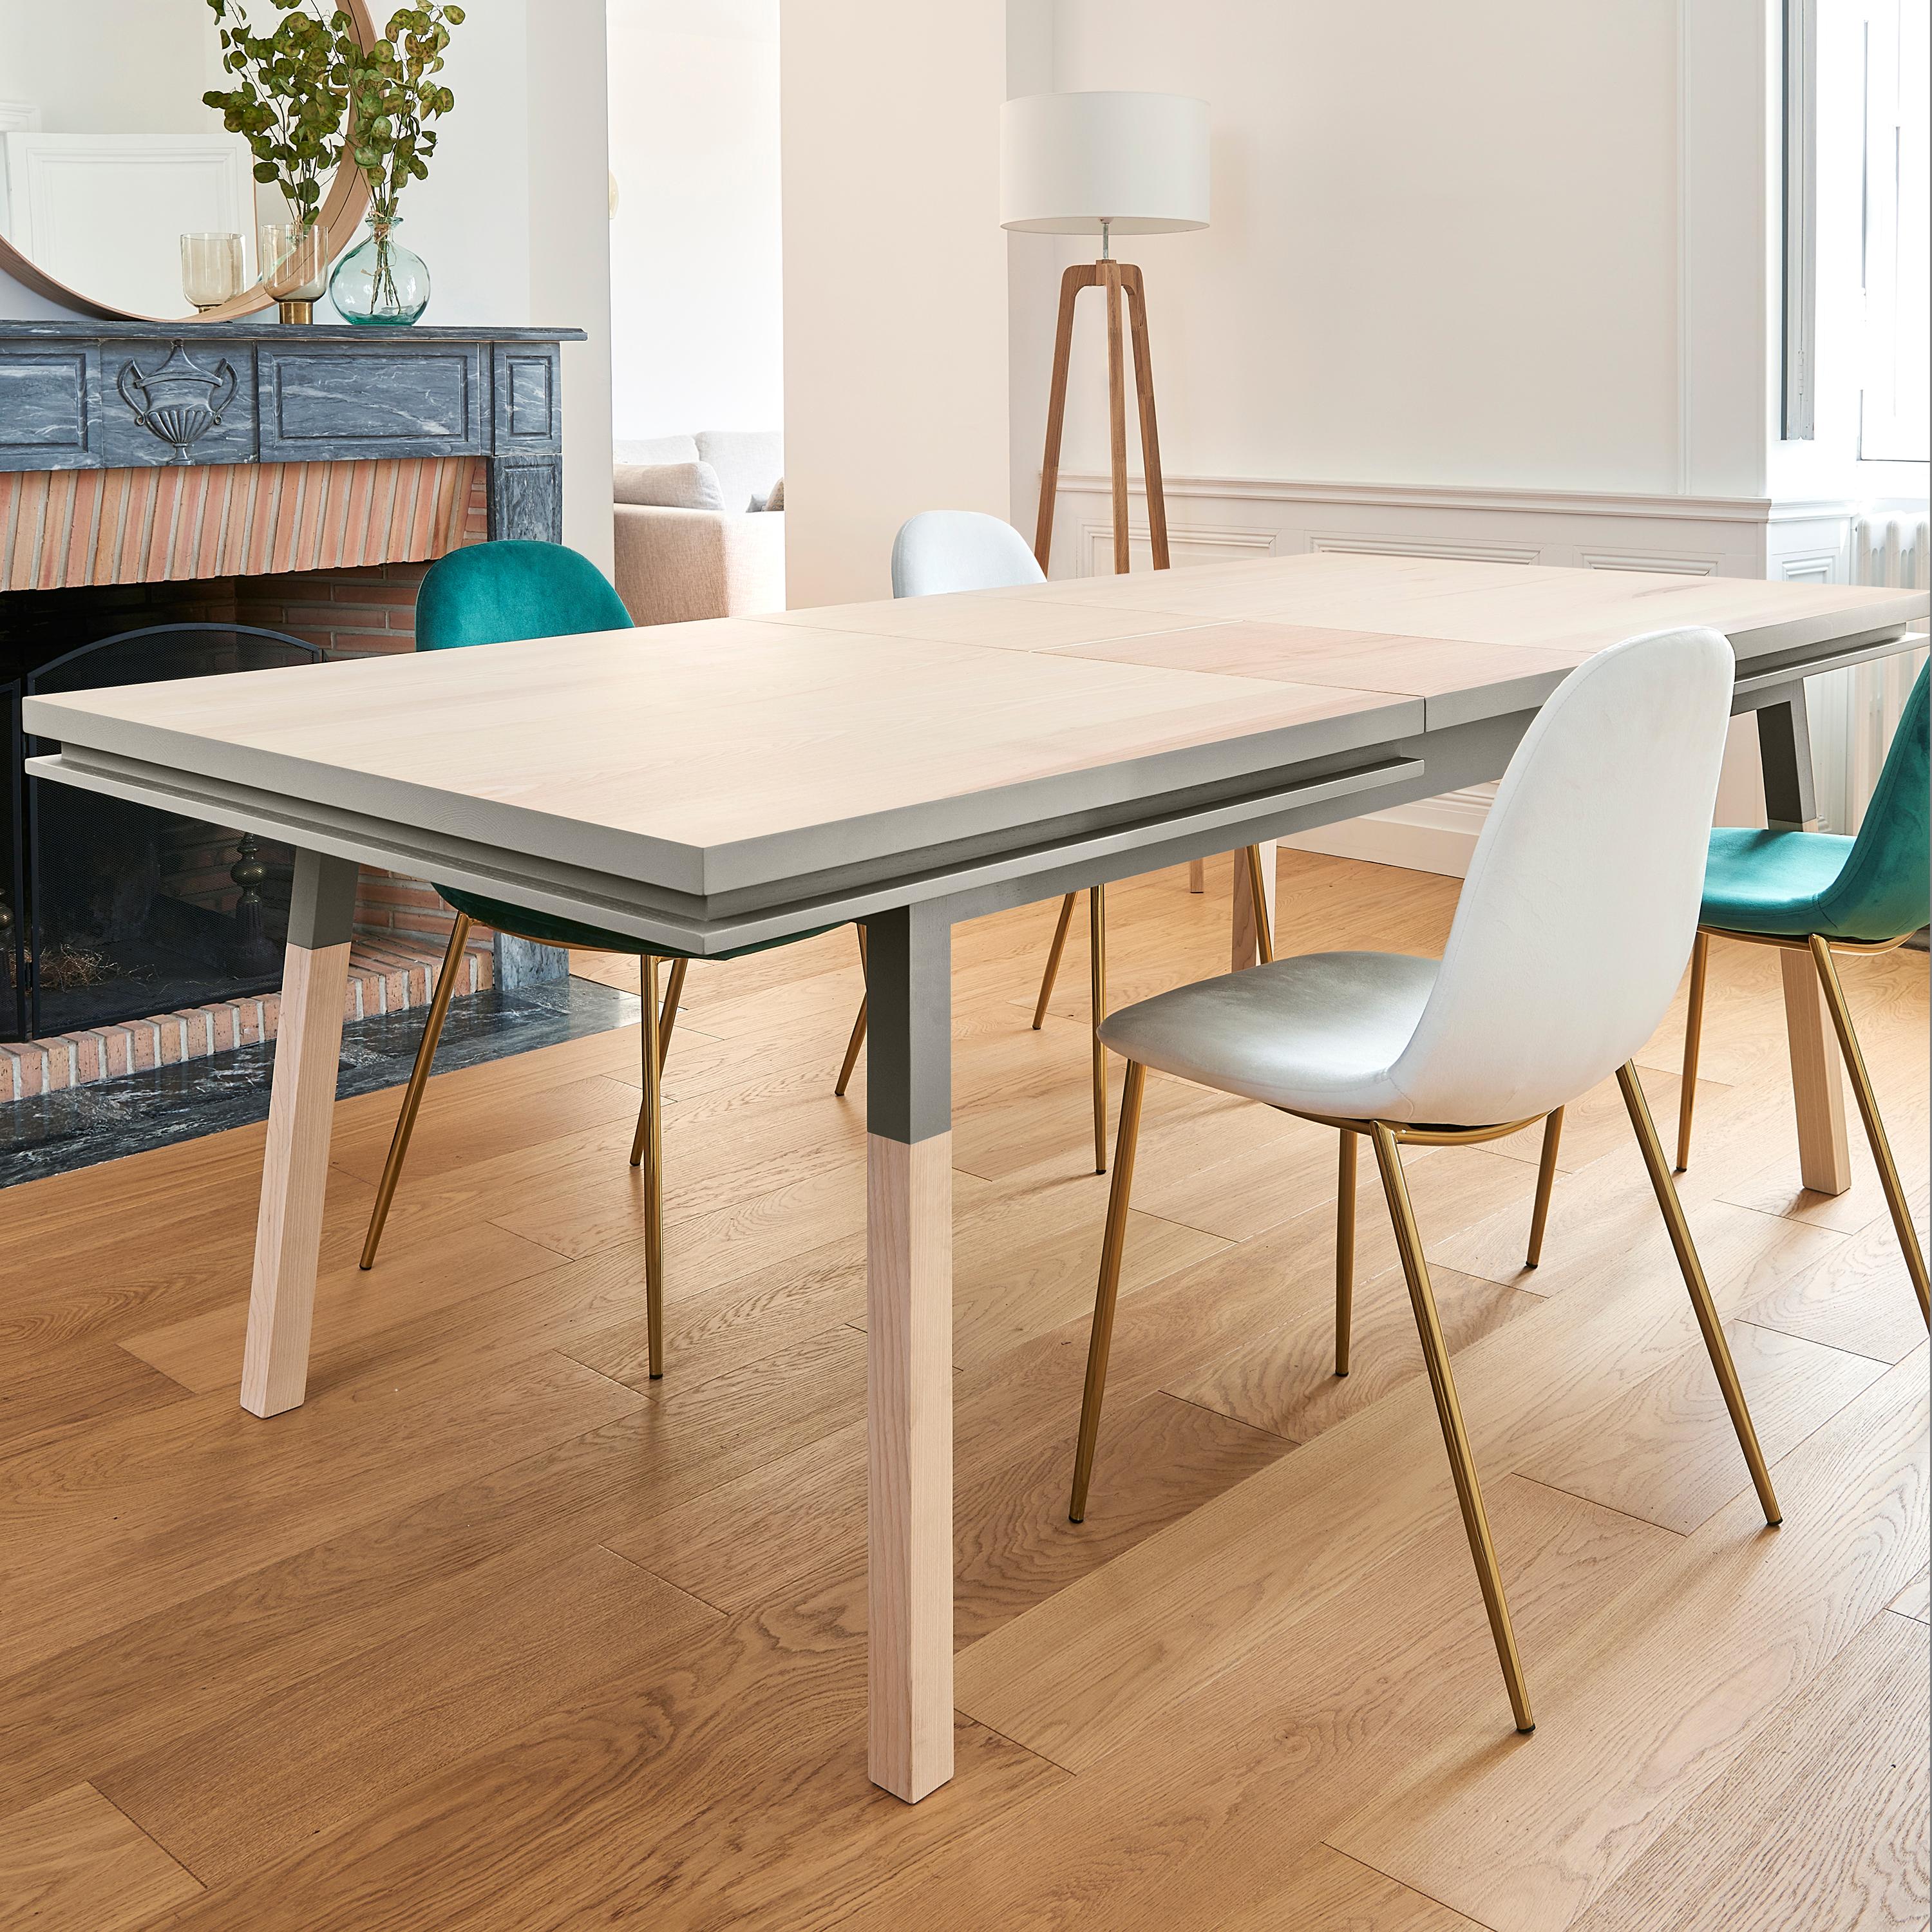 Scandinavian Modern Extensible Dining Table 100% in Solid Wood, Sleek Design by Eric Gizard, Paris  For Sale